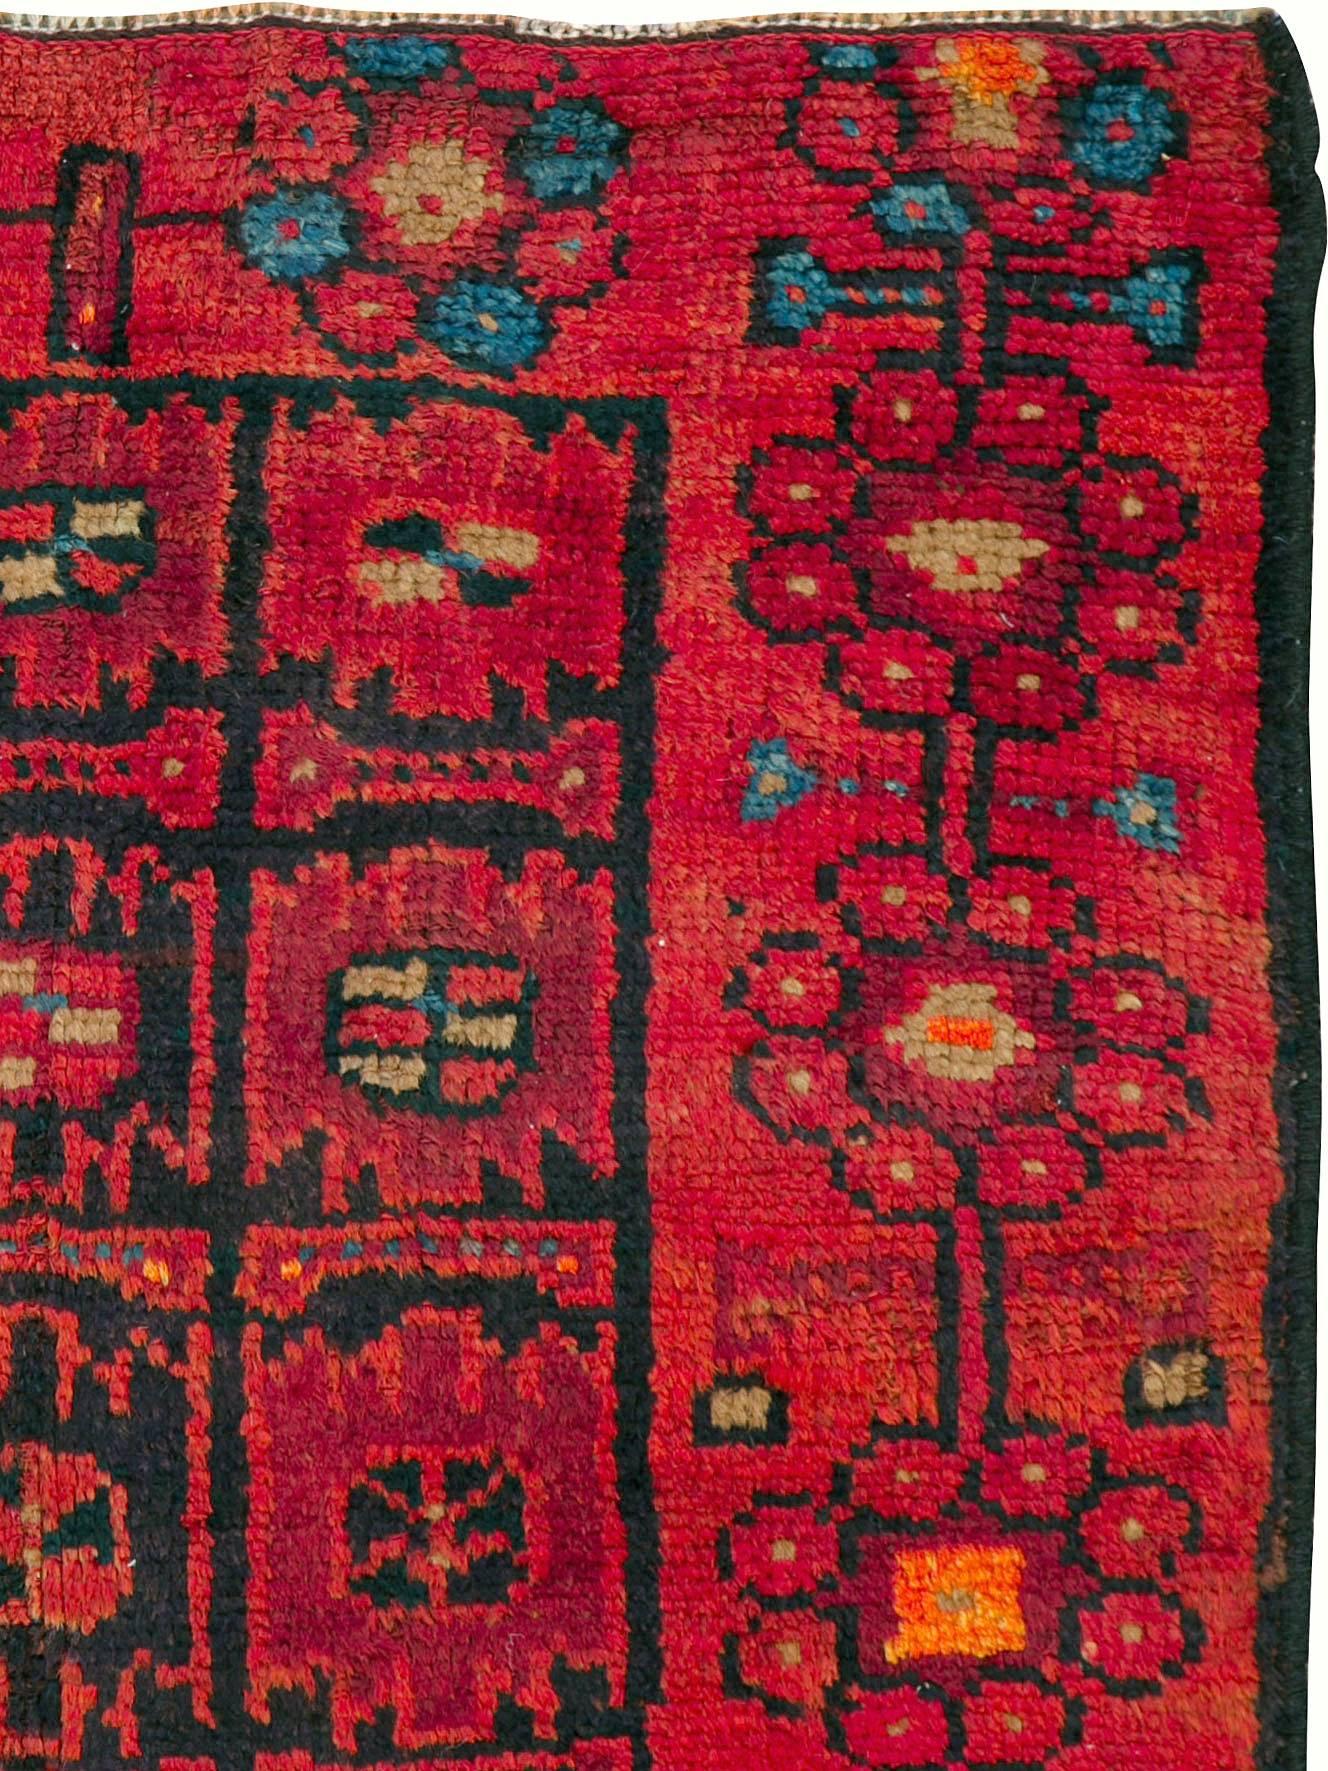 A vintage Persian Kurd rug from the mid-20th century.